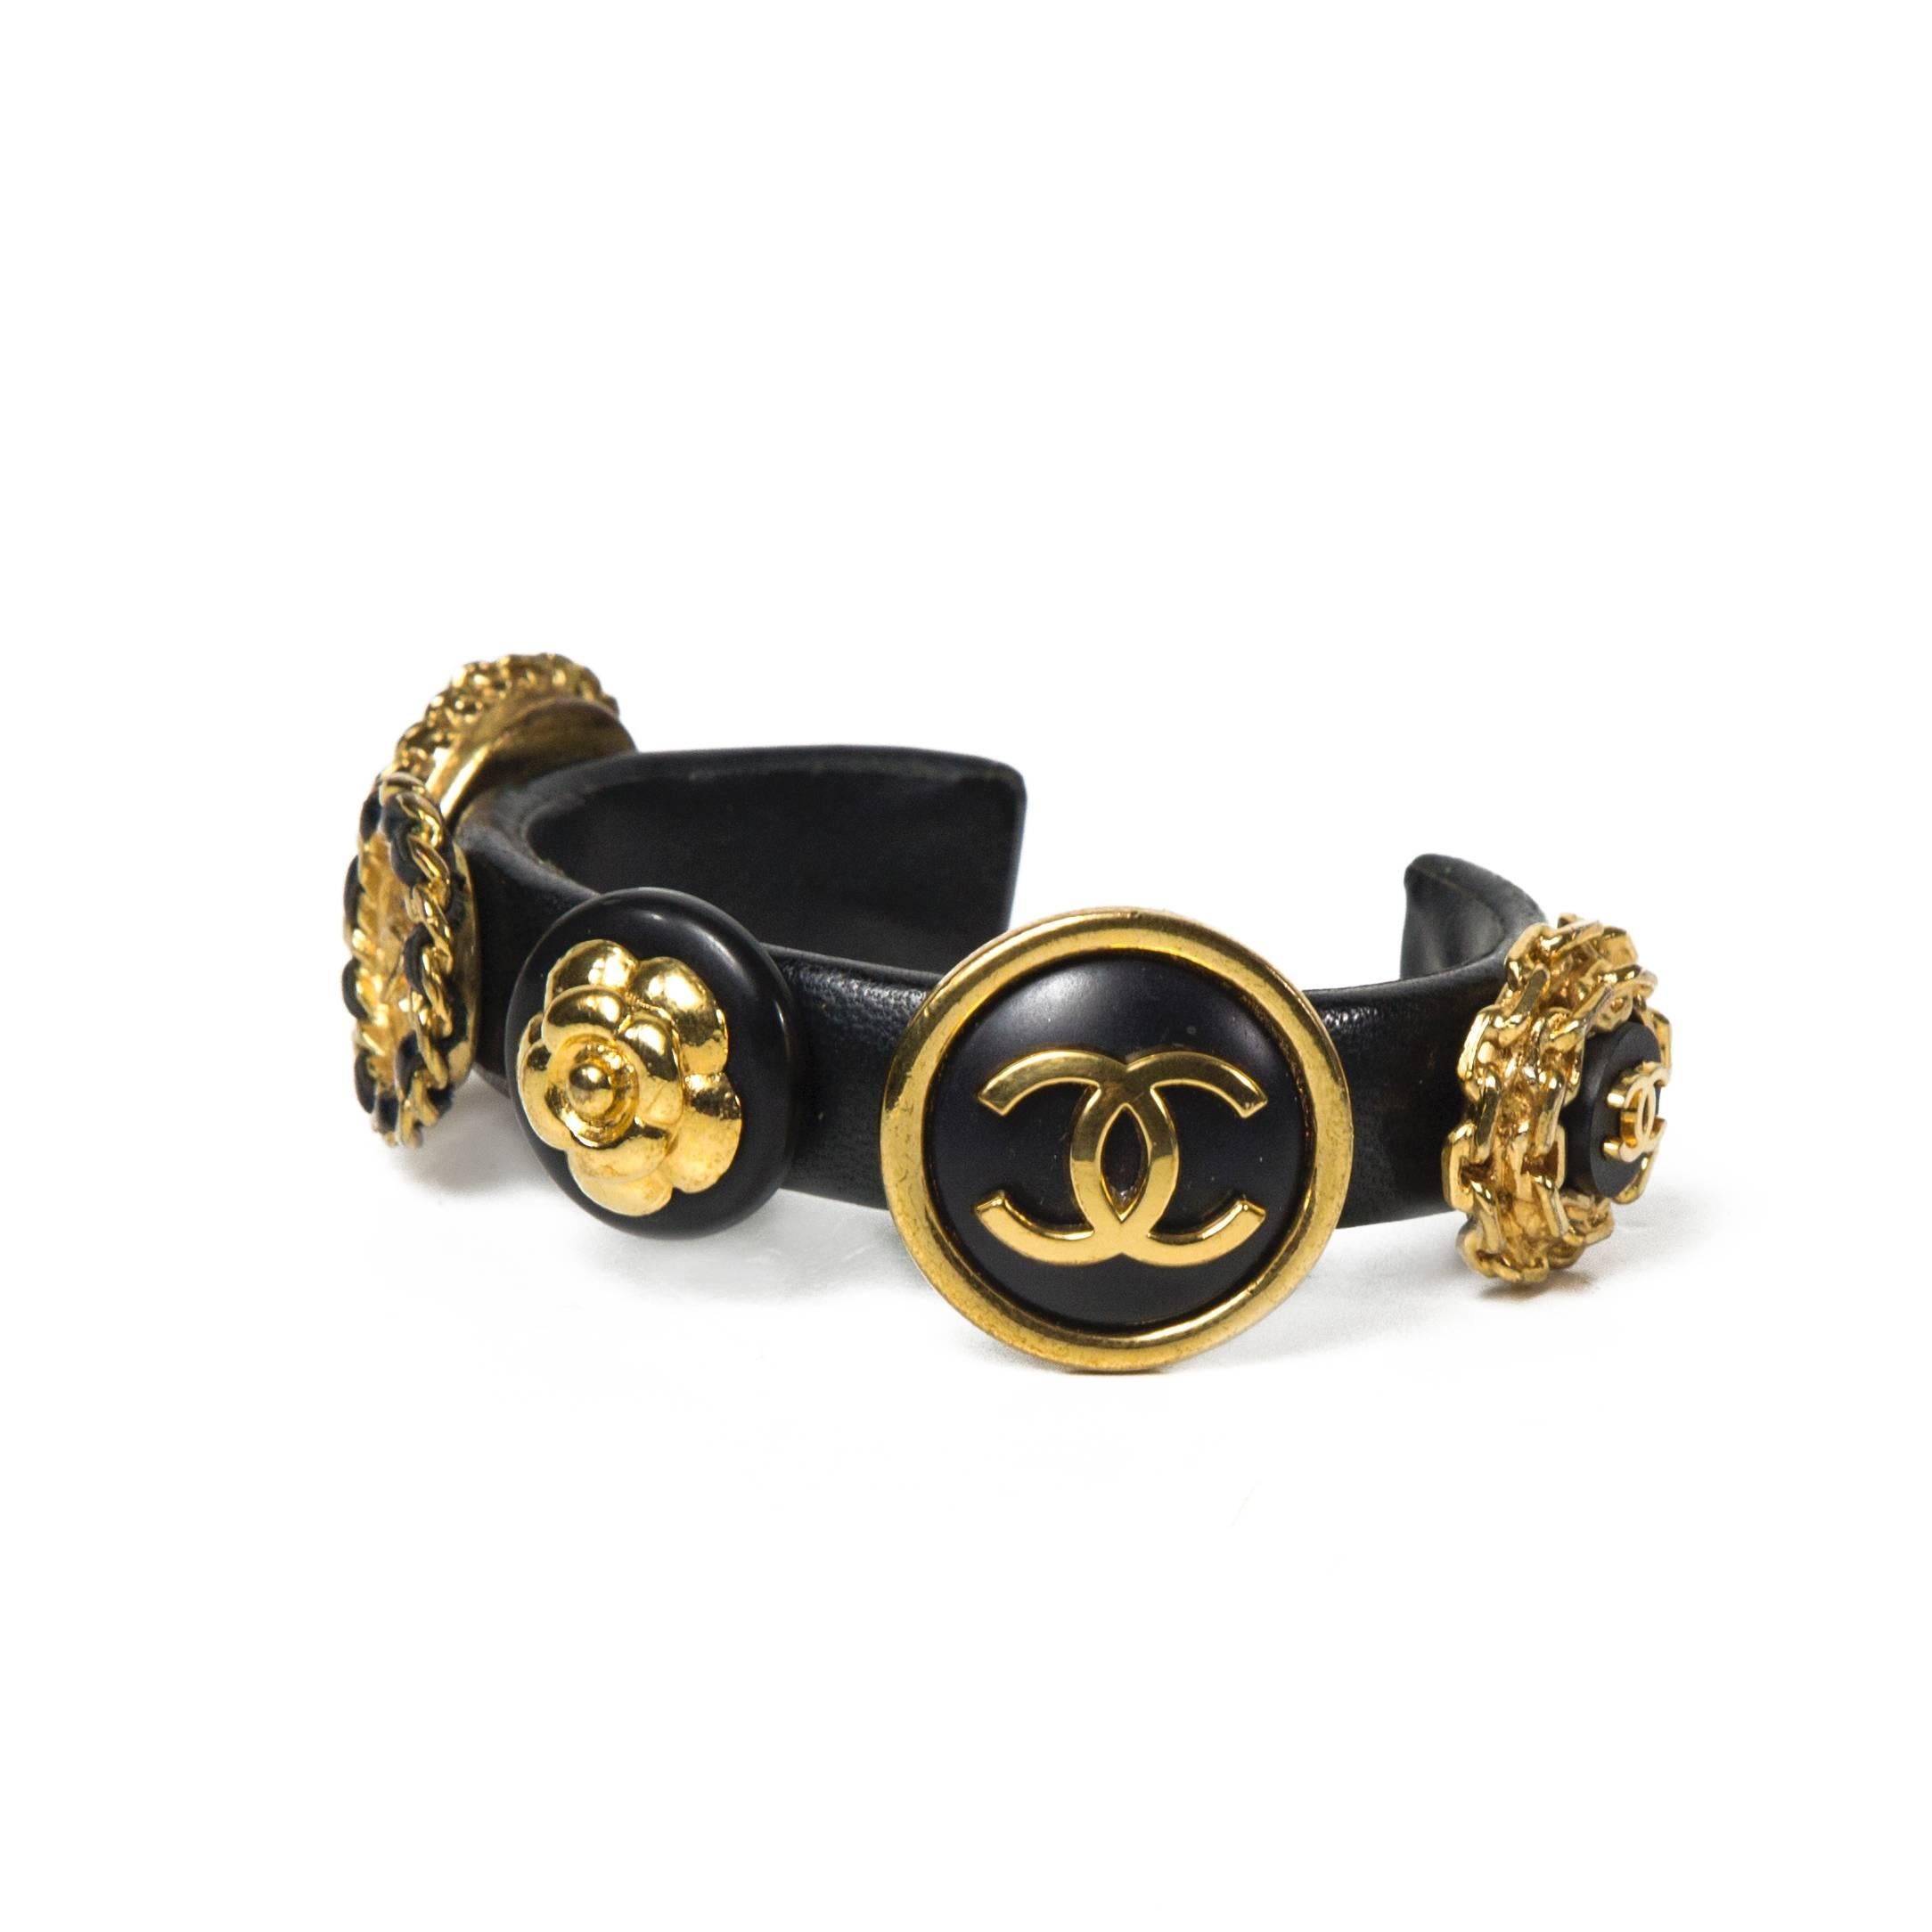 Chanel - 1980's Vintage Leather Charm Bracelet

Color: Gold / Black

Material: Metal / Leather

------------------------------------------------------------

Details:

- gold tone hardware

- CC medallion charms

- from collection 27 -